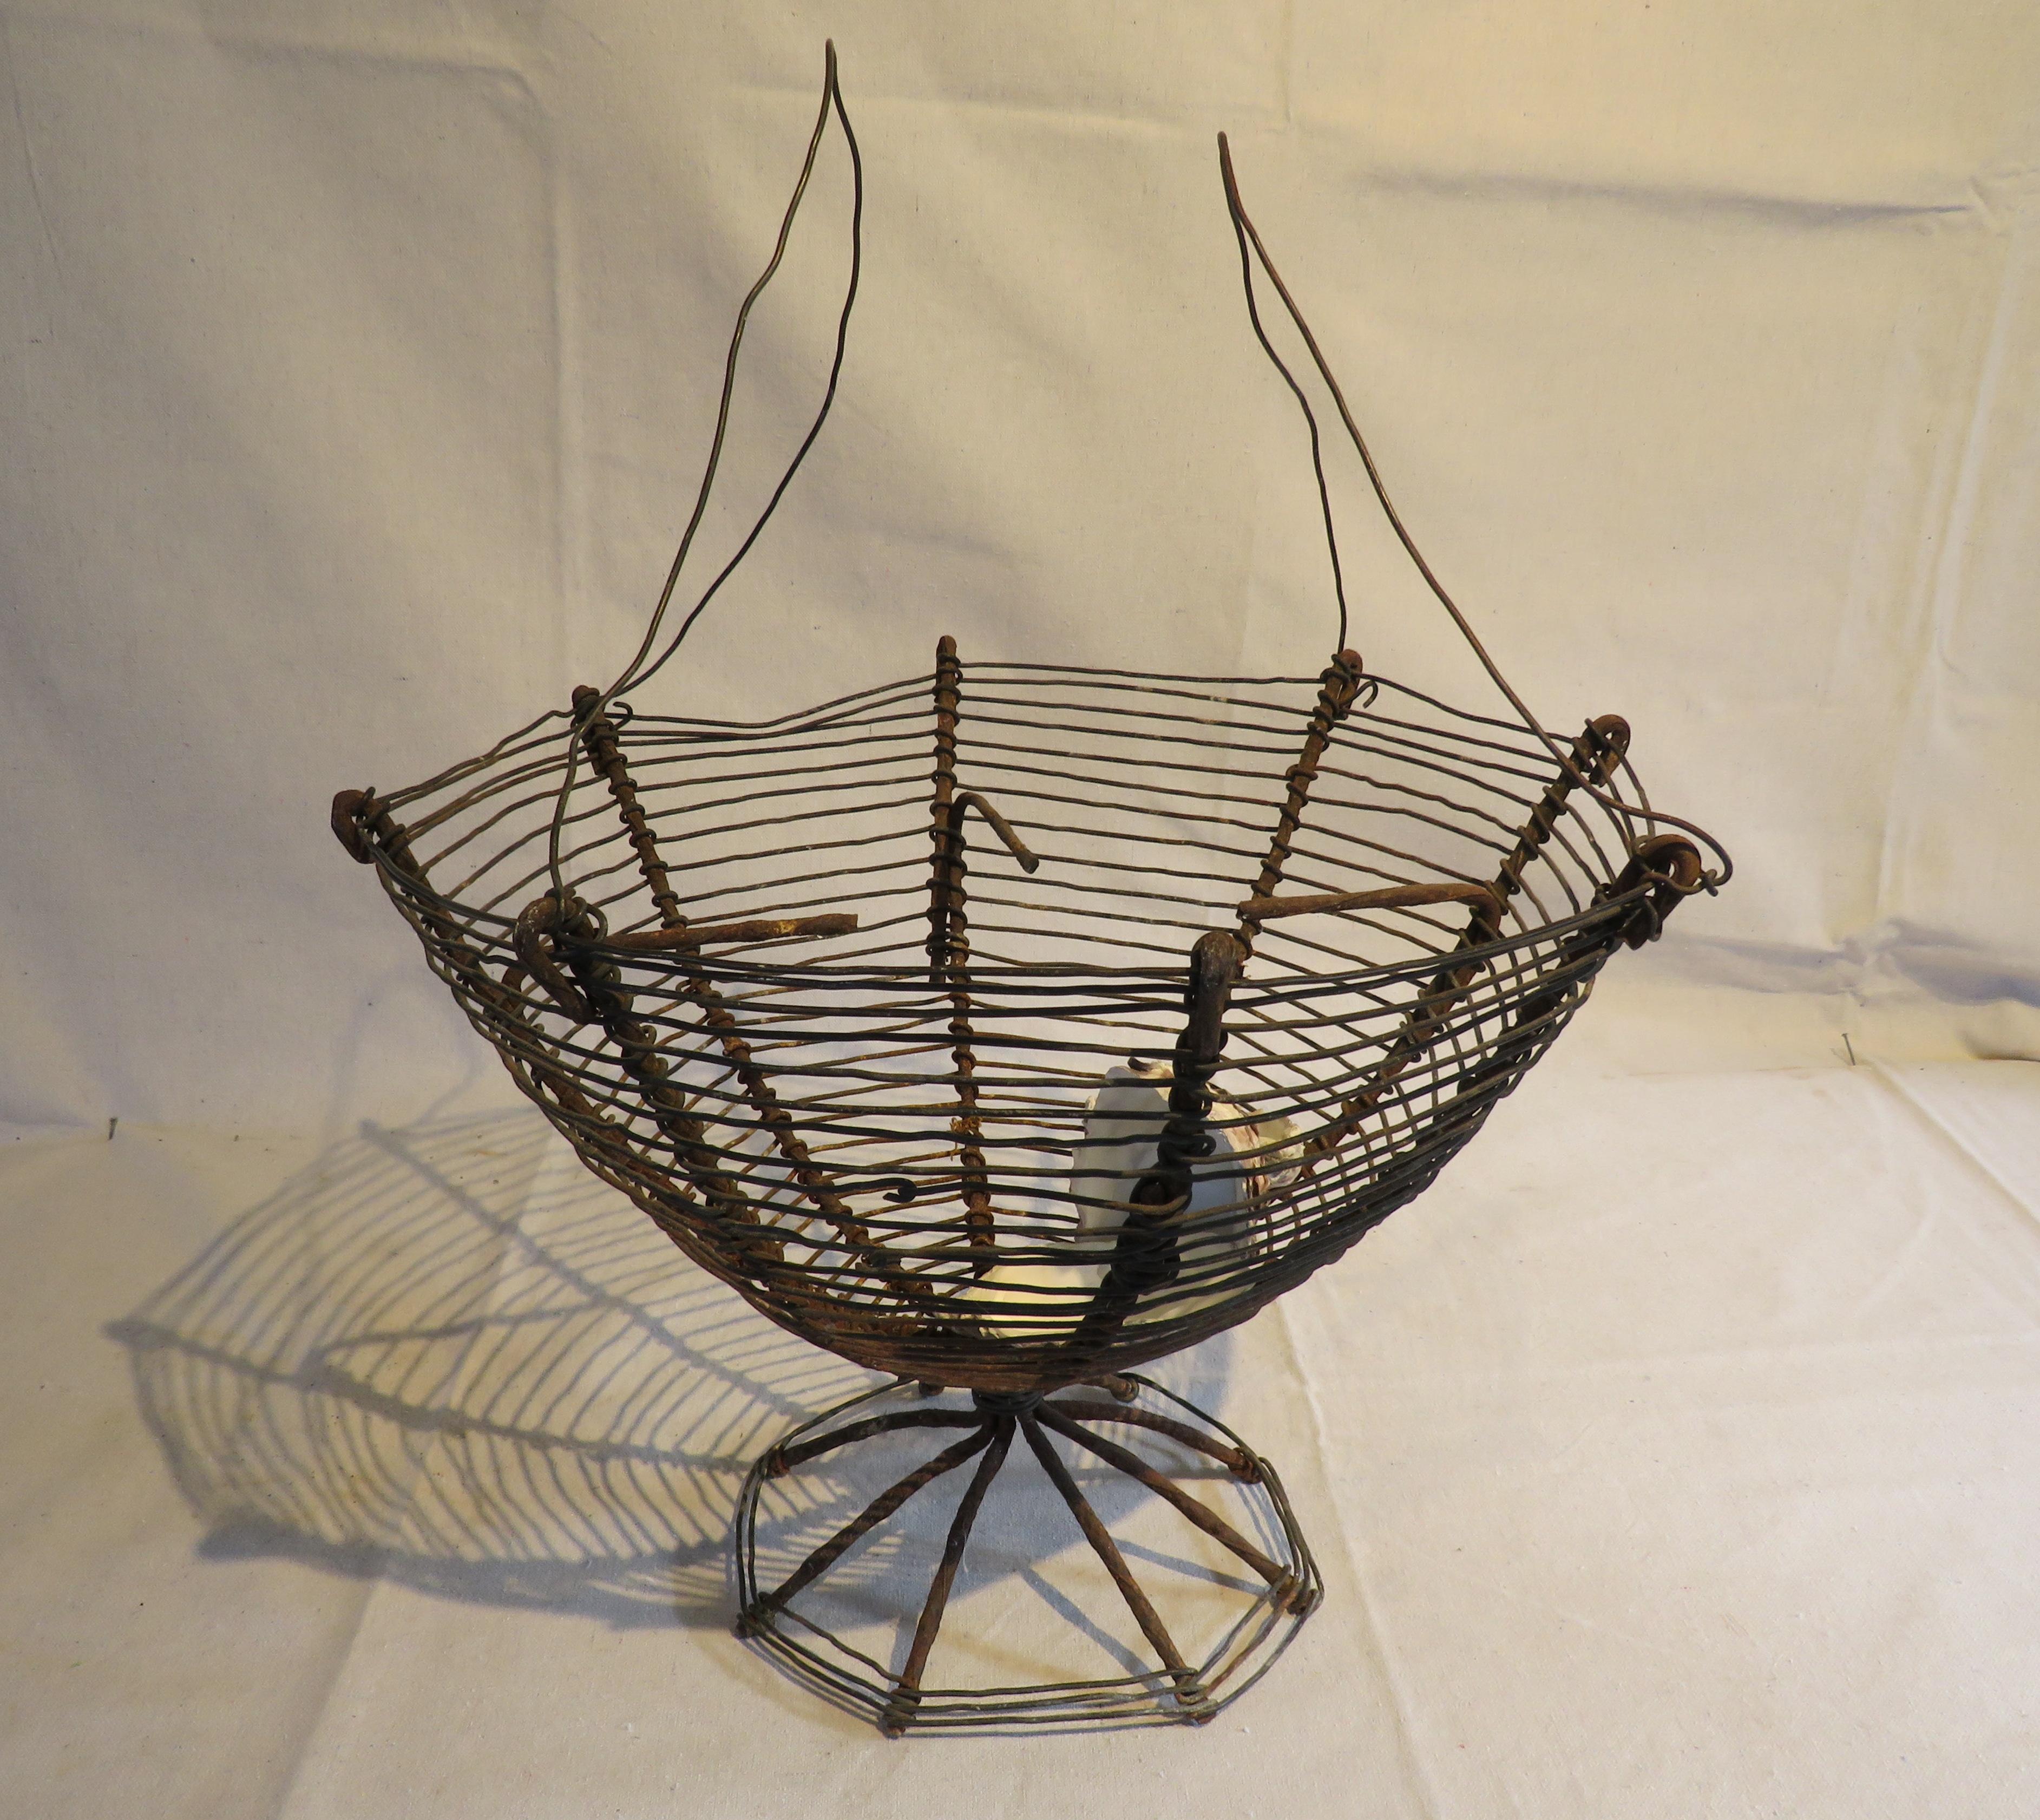 French Oyster Basket, crafted from wire, circa 1840.